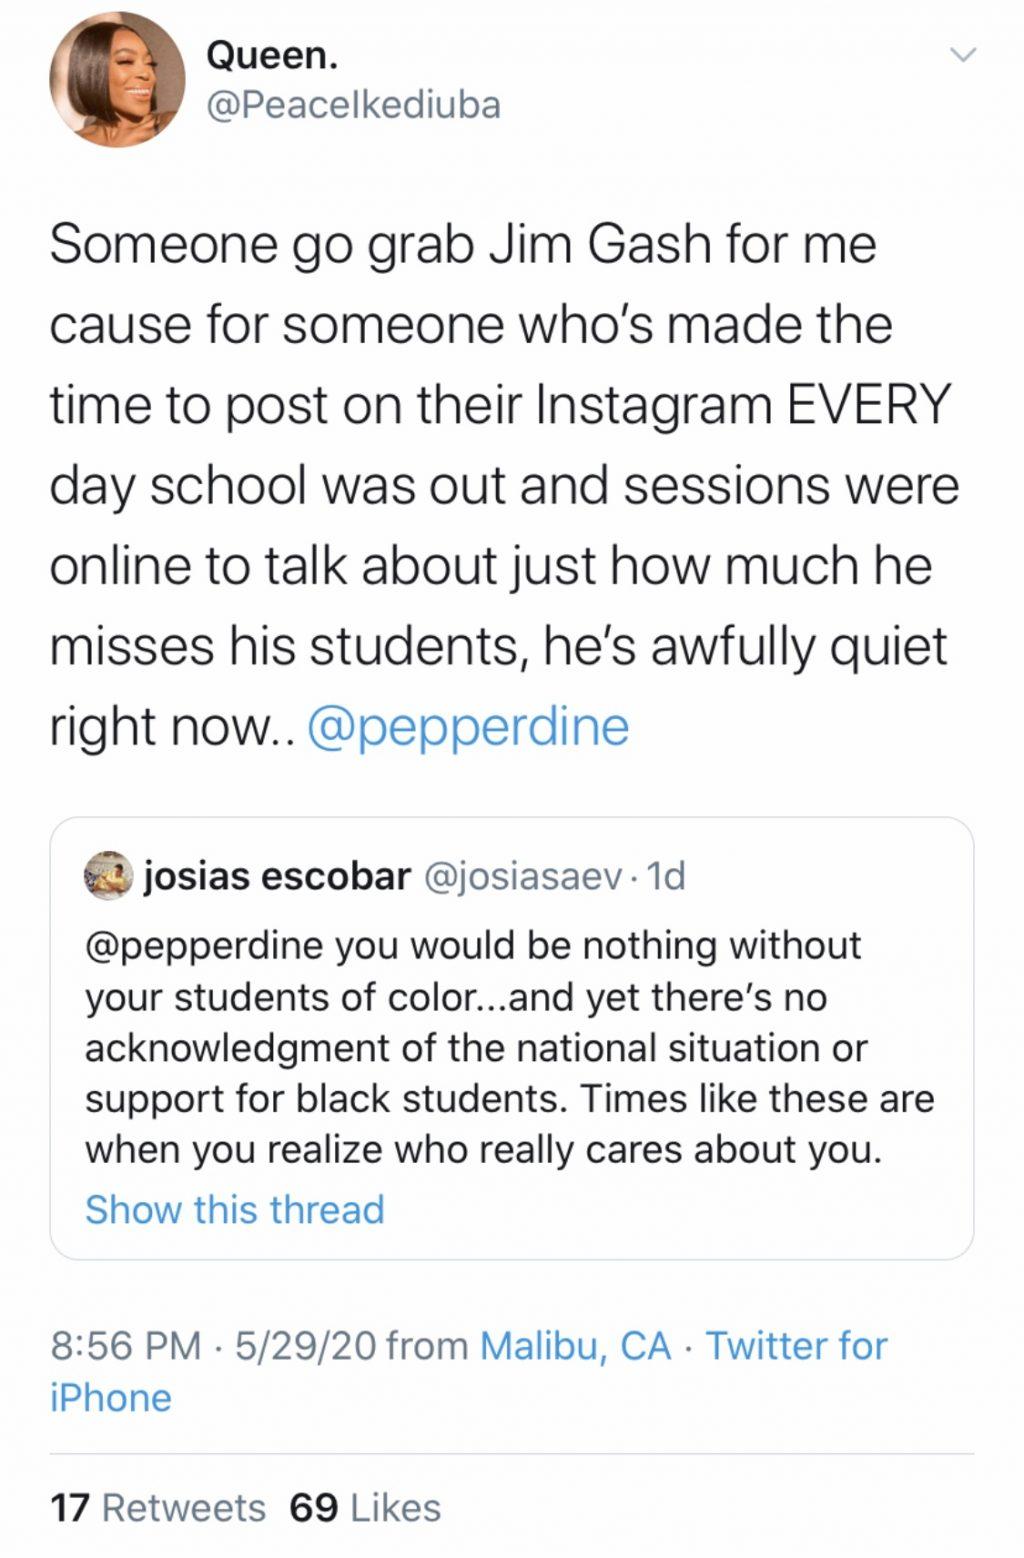 Screenshot of one of the many tweets posted May 29 on Twitter urging Pepperdine and President Jim Gash to speak out about the murder of George Floyd.